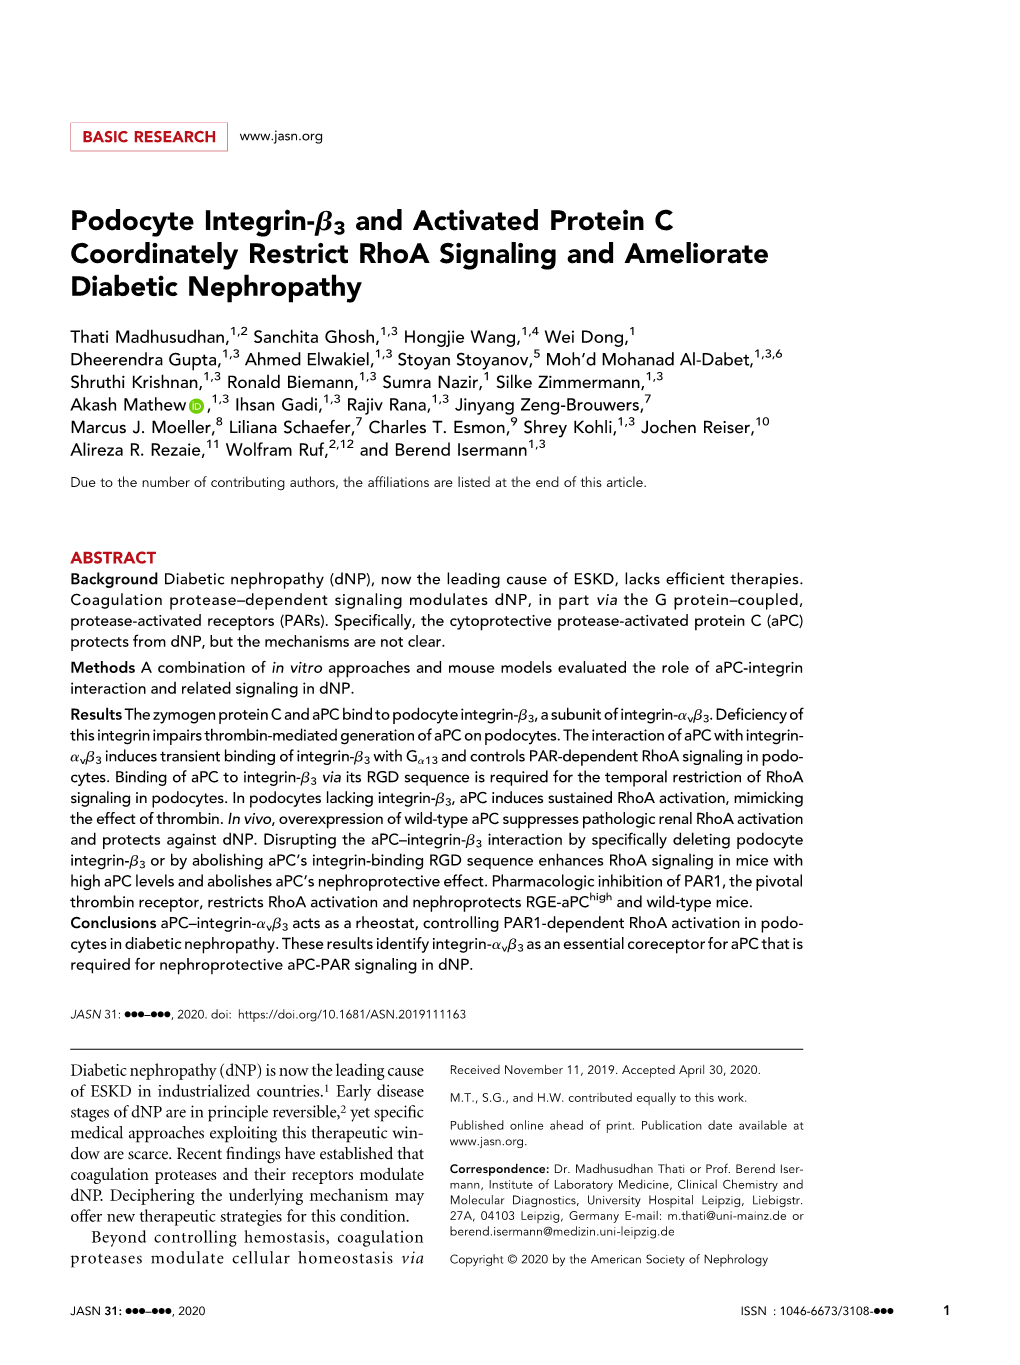 Podocyte Integrin-Β3 and Activated Protein C Coordinately Restrict Rhoa Signaling and Ameliorate Diabetic Nephropathy